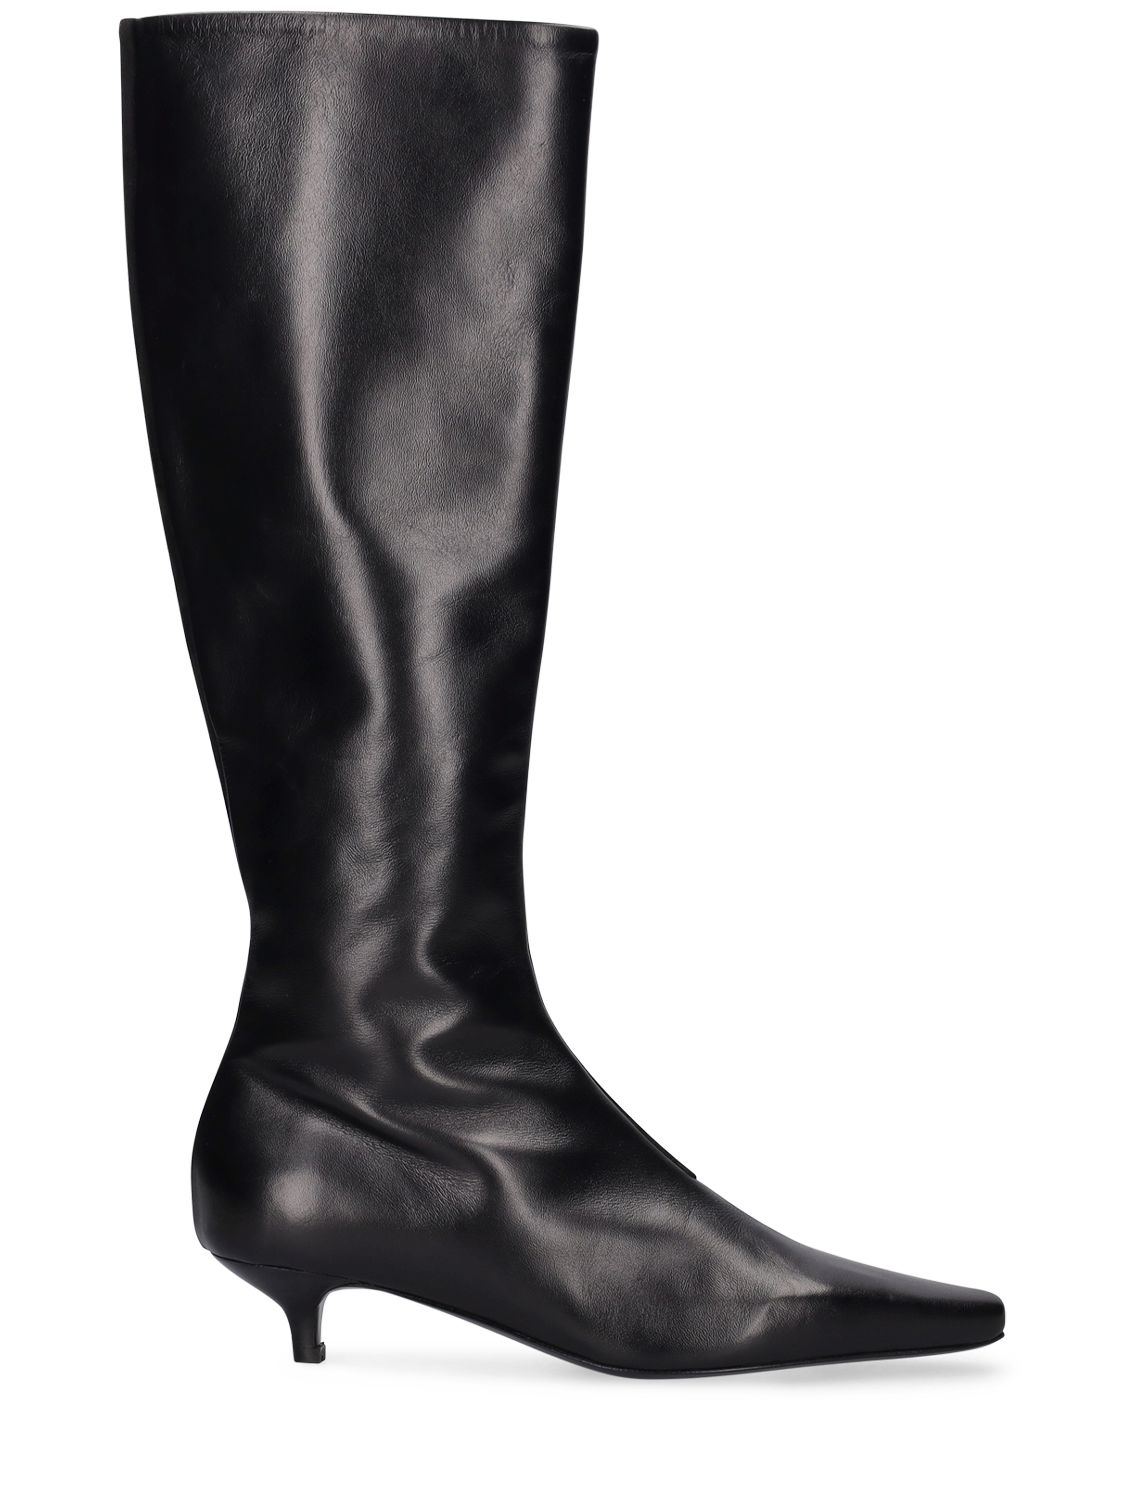 35mm The Slim Leather Tall Boots